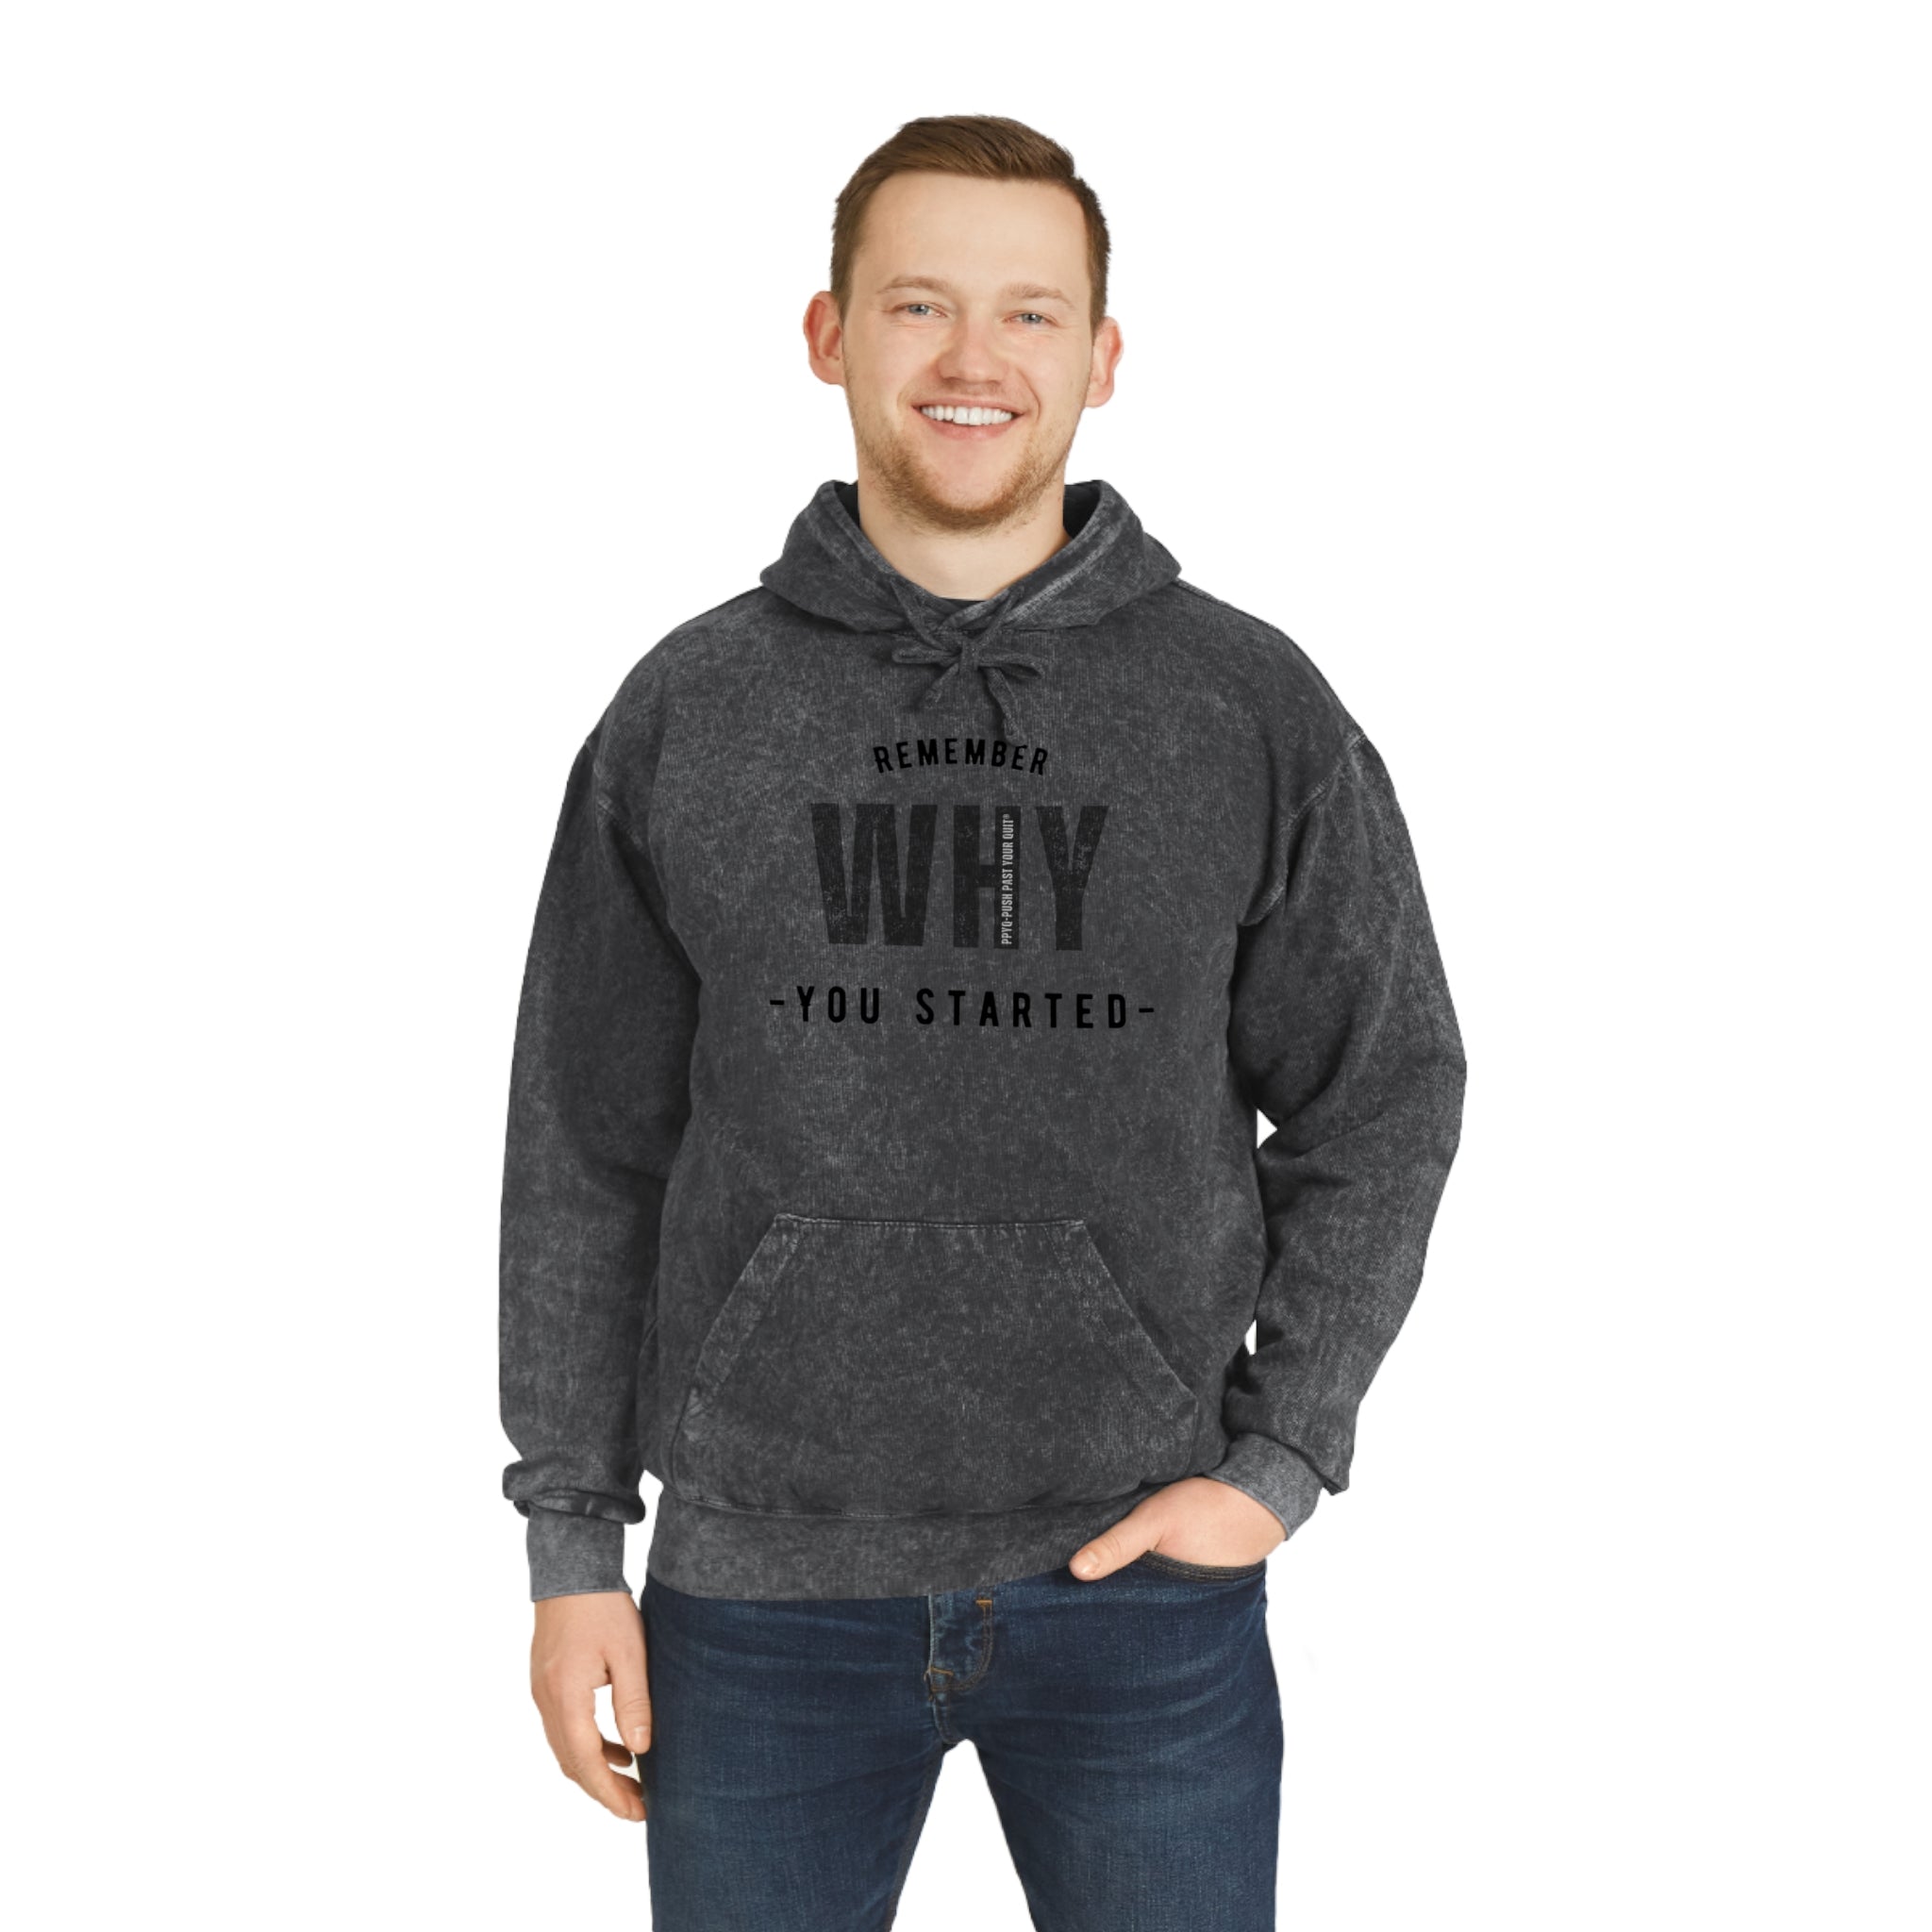 Remember Why You Started Unisex Mineral Wash Hoodie